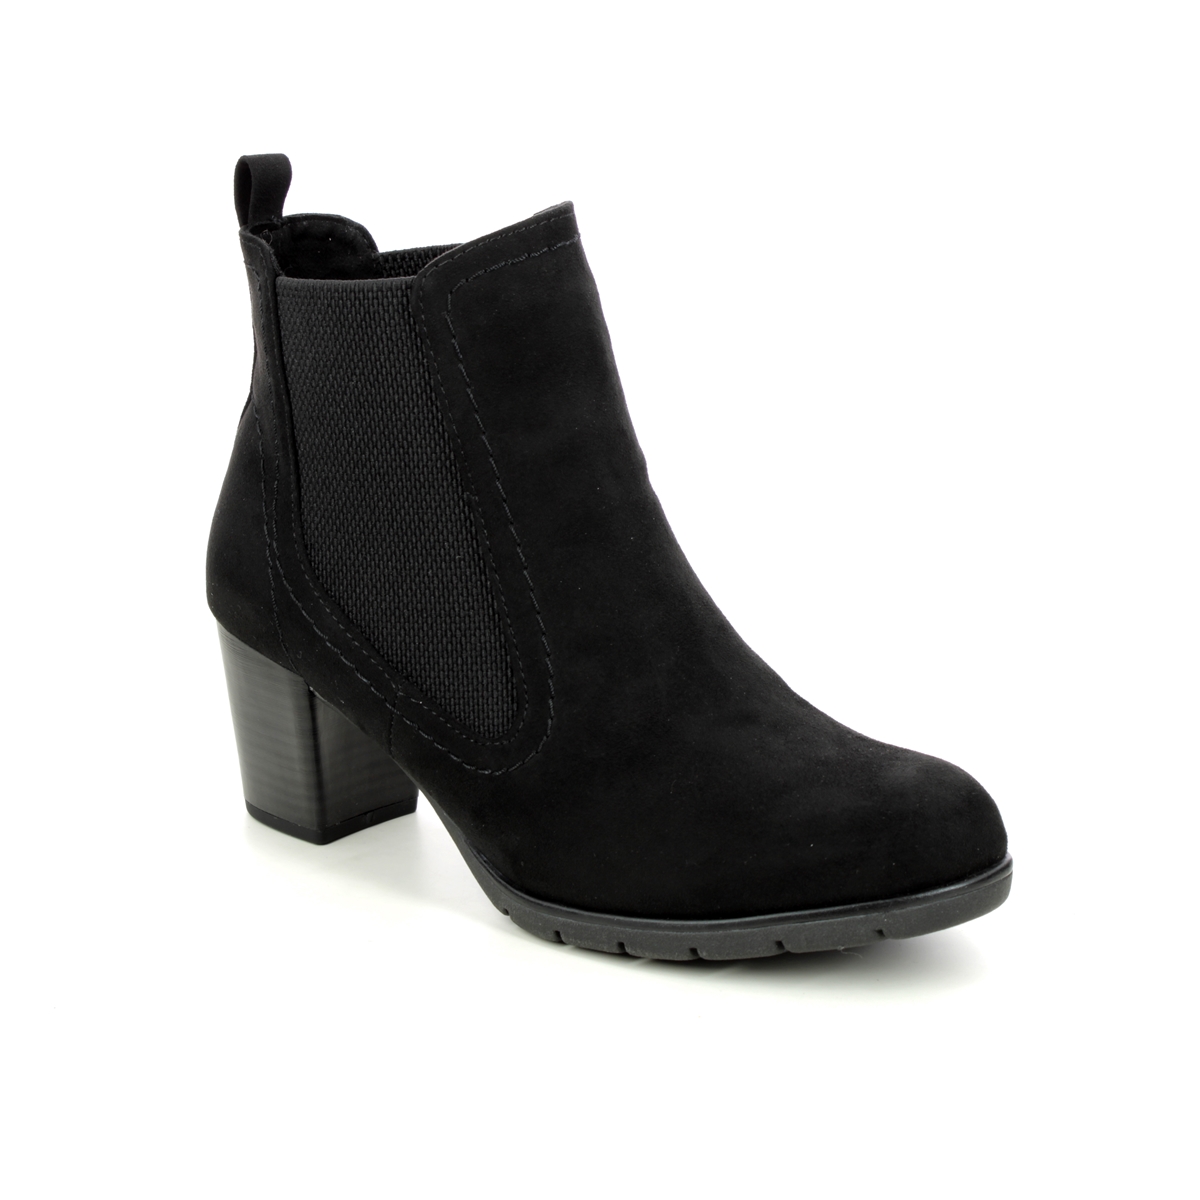 Marco Tozzi Pepa   05 Black Womens Ankle Boots 25355-35-098 In Size 38 In Plain Black